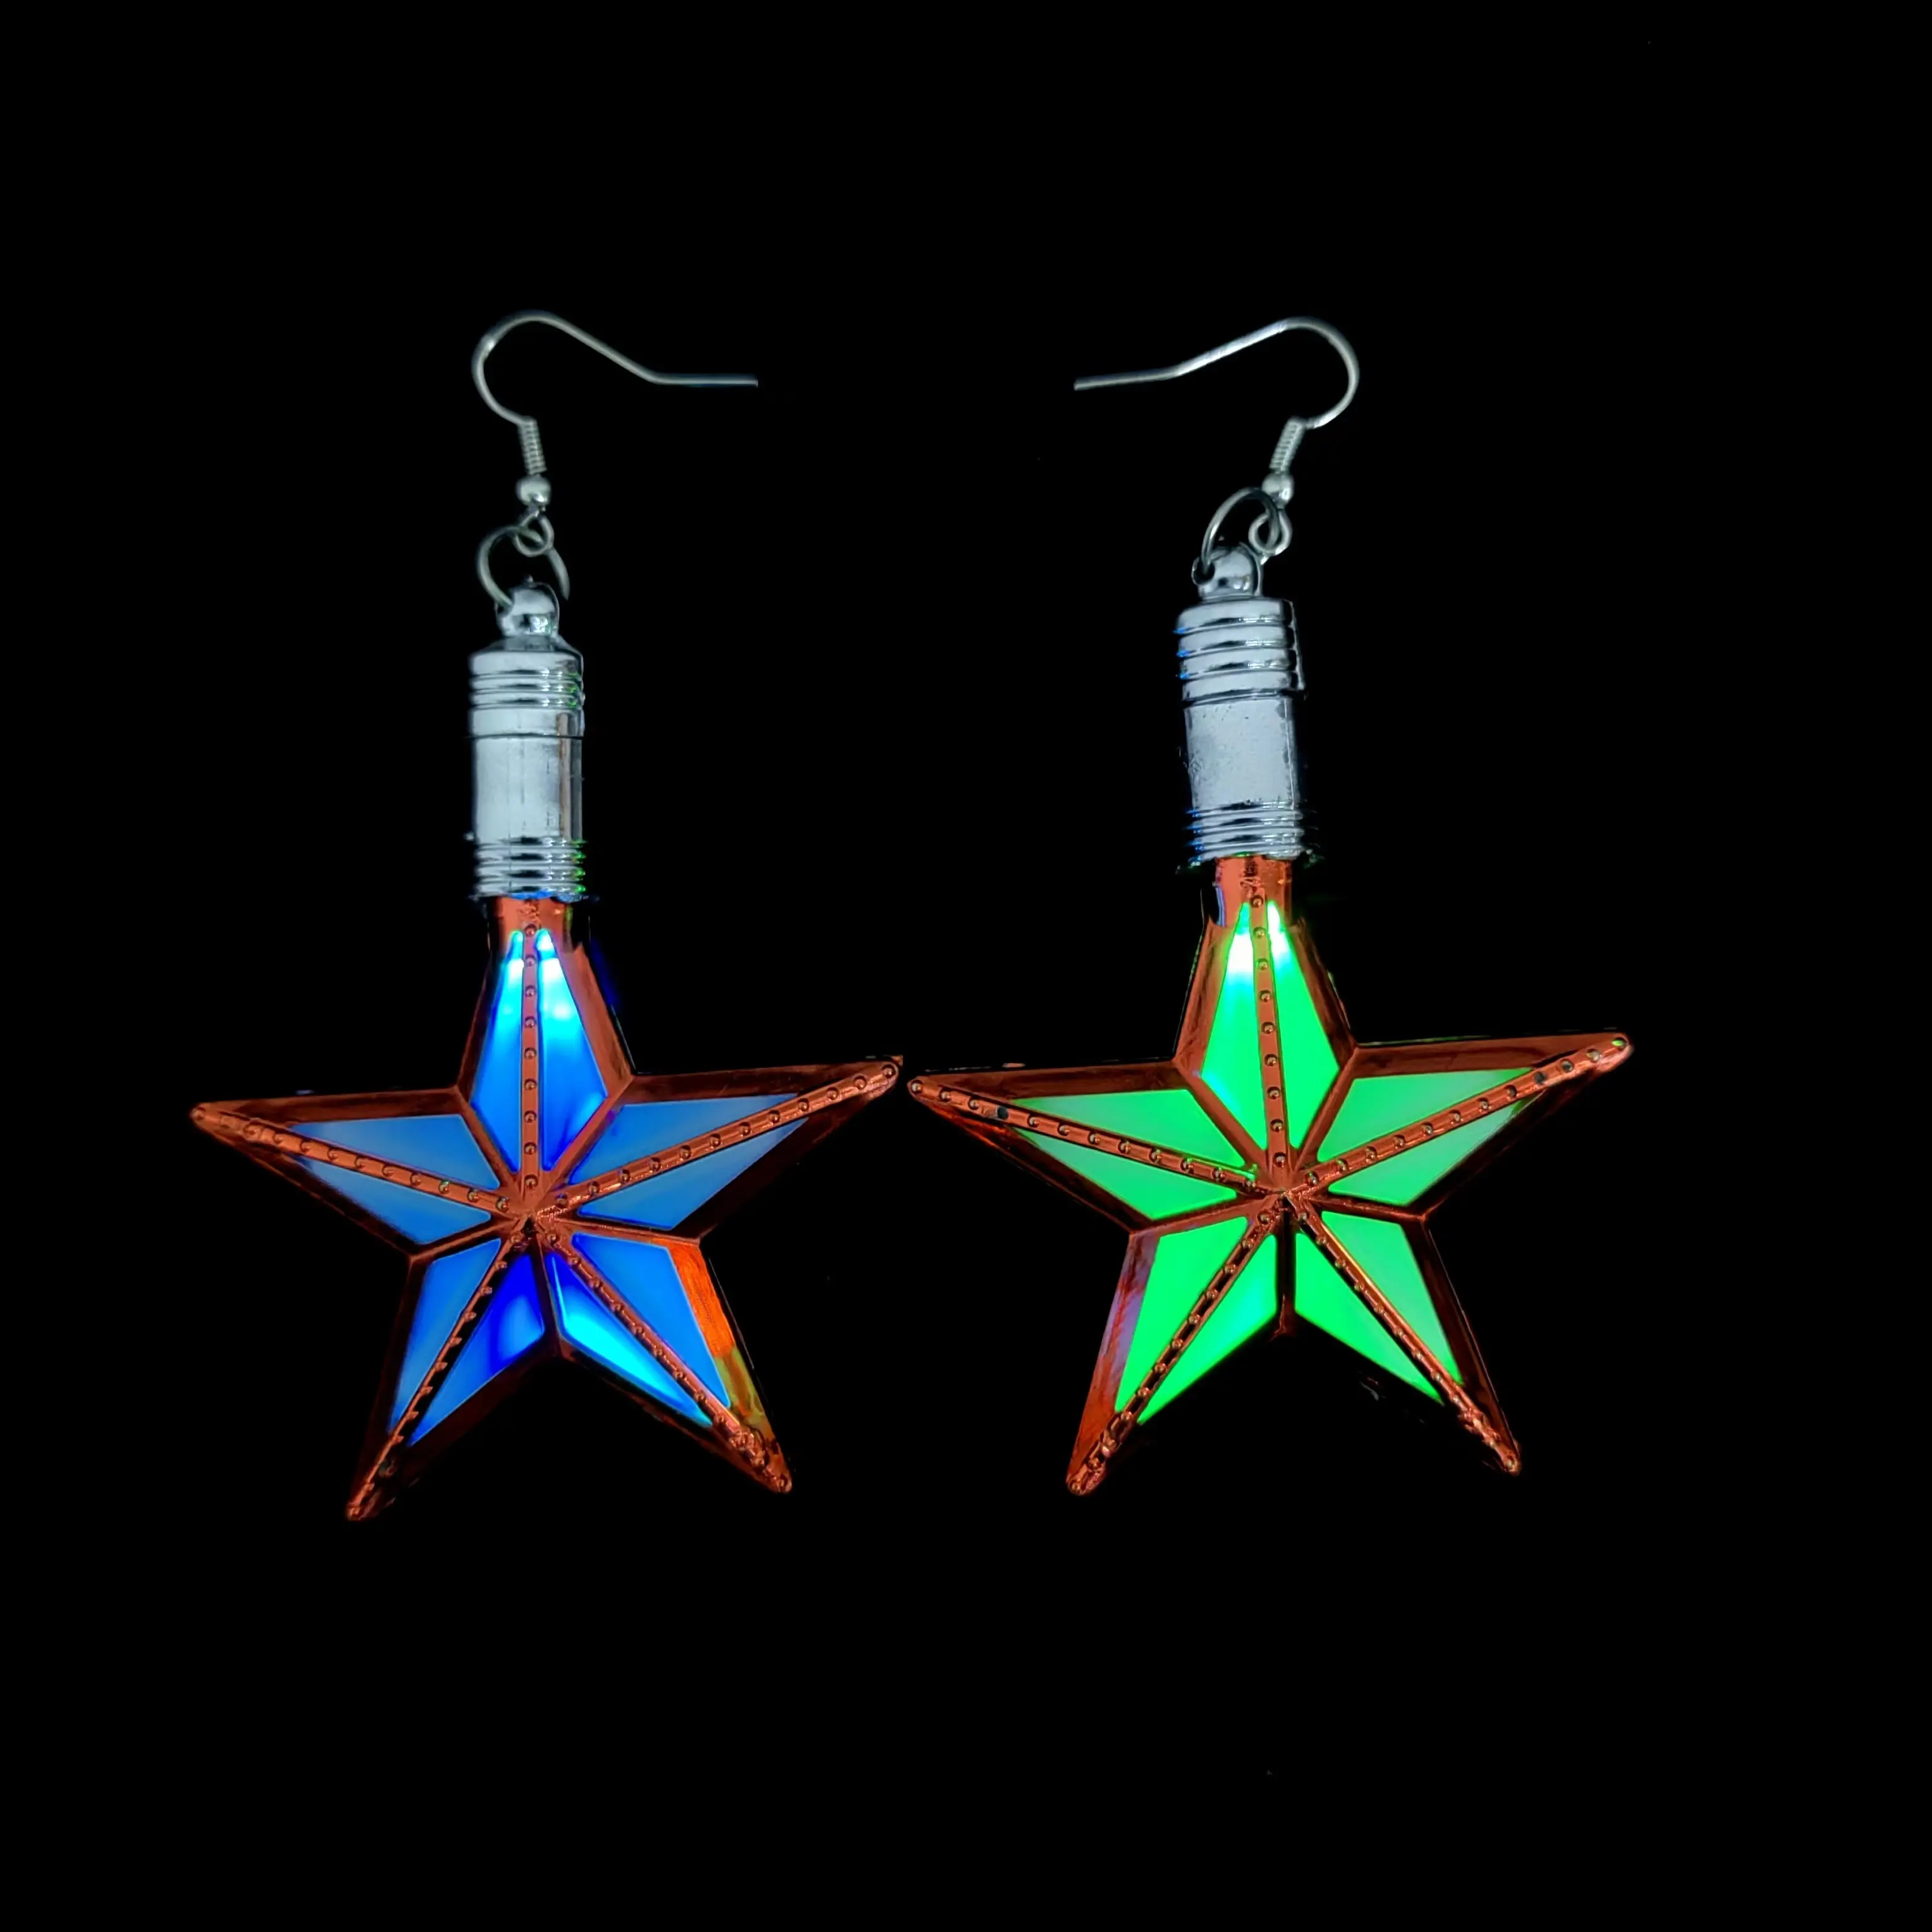 Hot Sell Wholesale Five-pointed star earrings National Day Festival Supplies Decoration Party Flashing